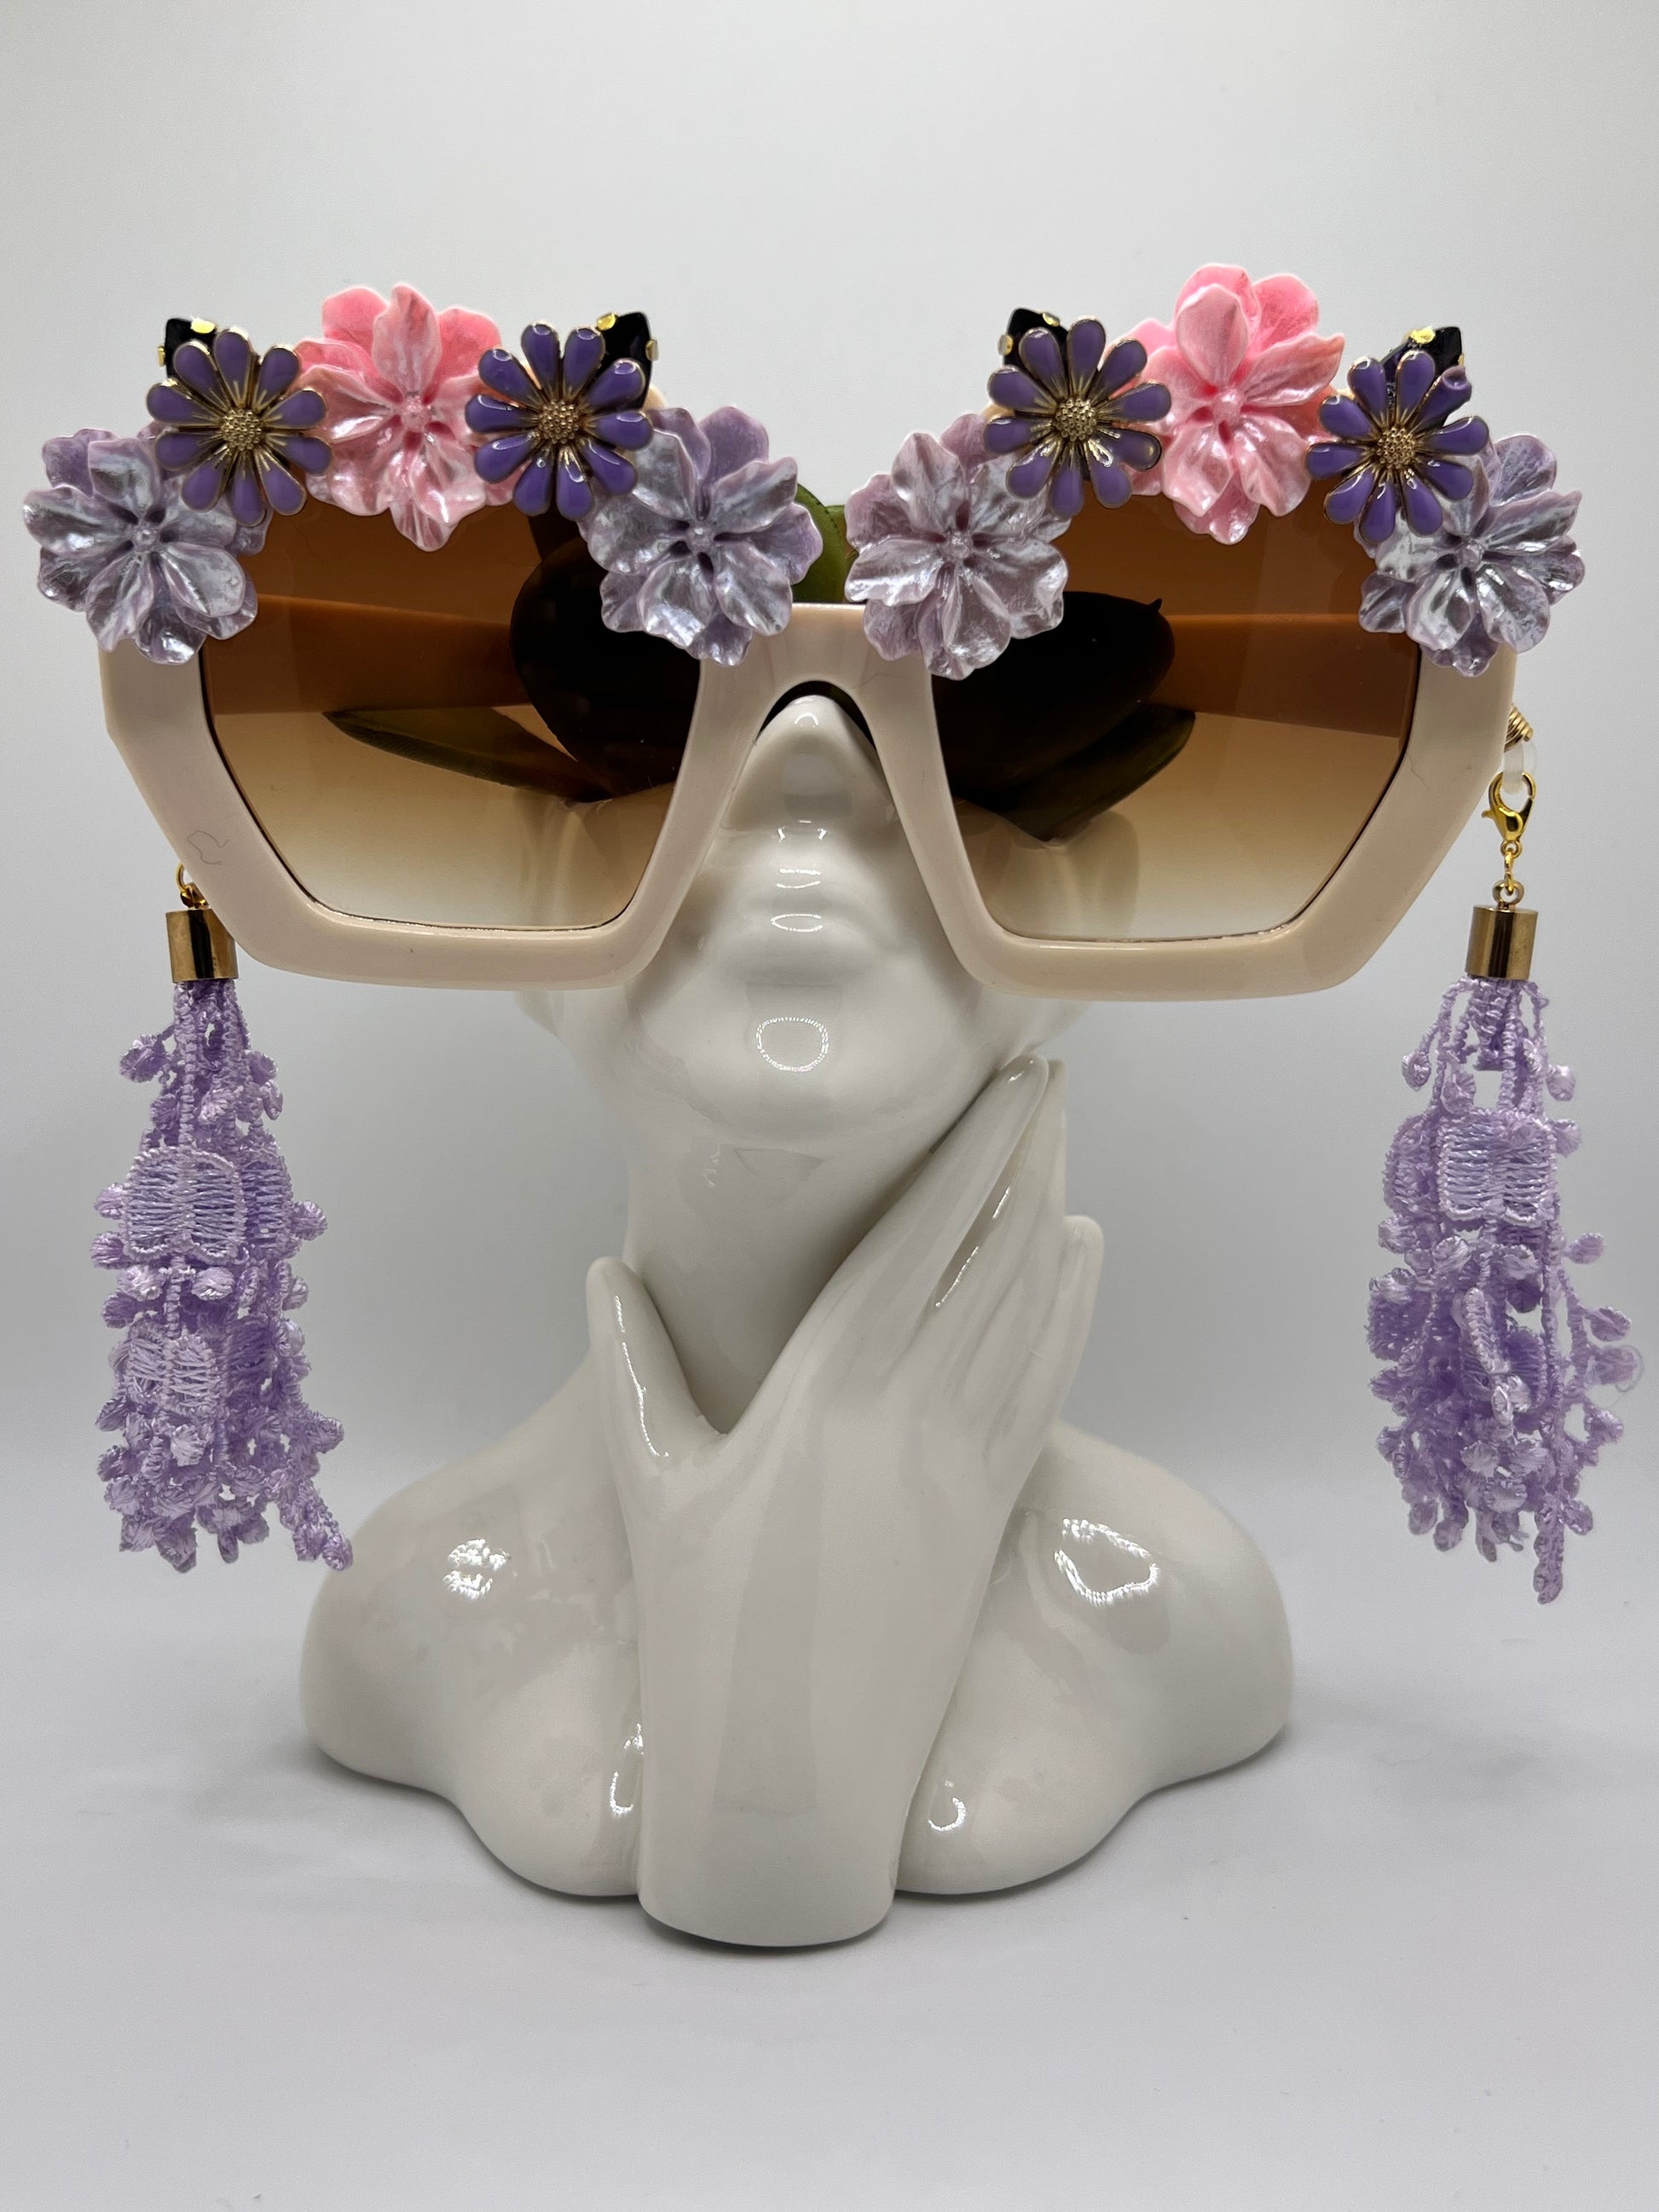 Hues of pink and purple flowers surround these oversized polygon sunglasses and are accompanied by an adjustable and removable eyewear chain and removable lace tassels in purple.